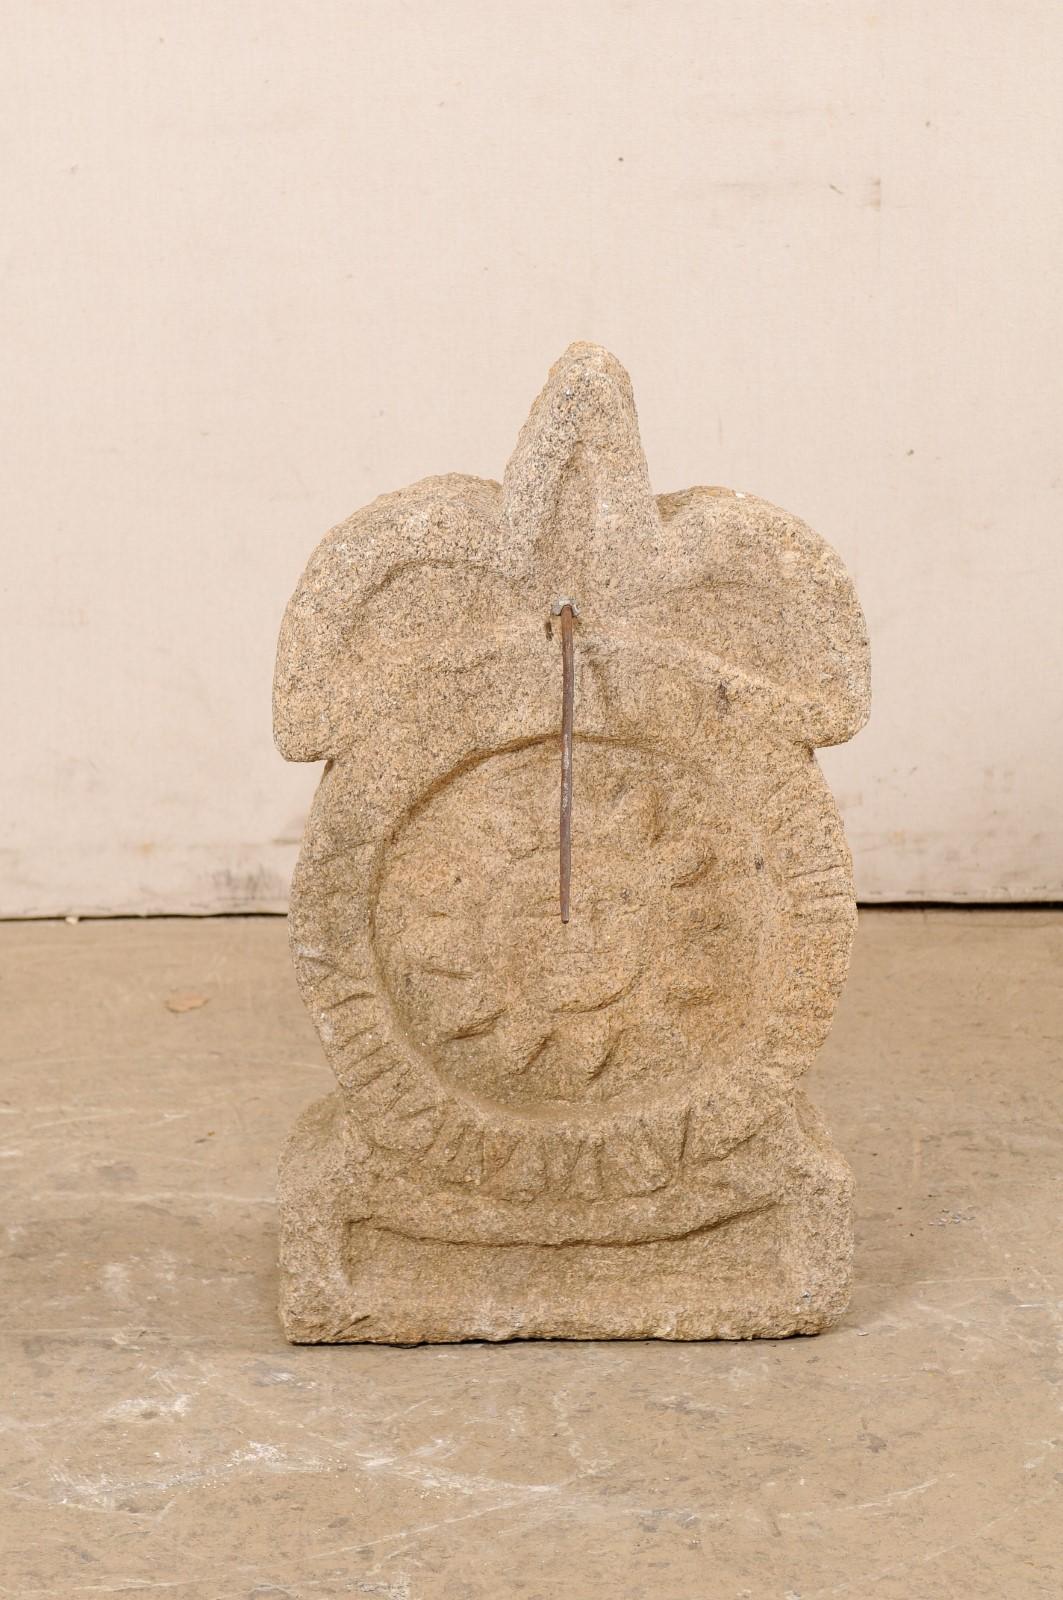 A Spanish carved-stone sundial in fleur de lys motif. This vintage sundial from Spain has been hand-carved from a single piece of stone and features a fleur de lys crest top, over a rounded body with a sun-carved center within roman numerals set